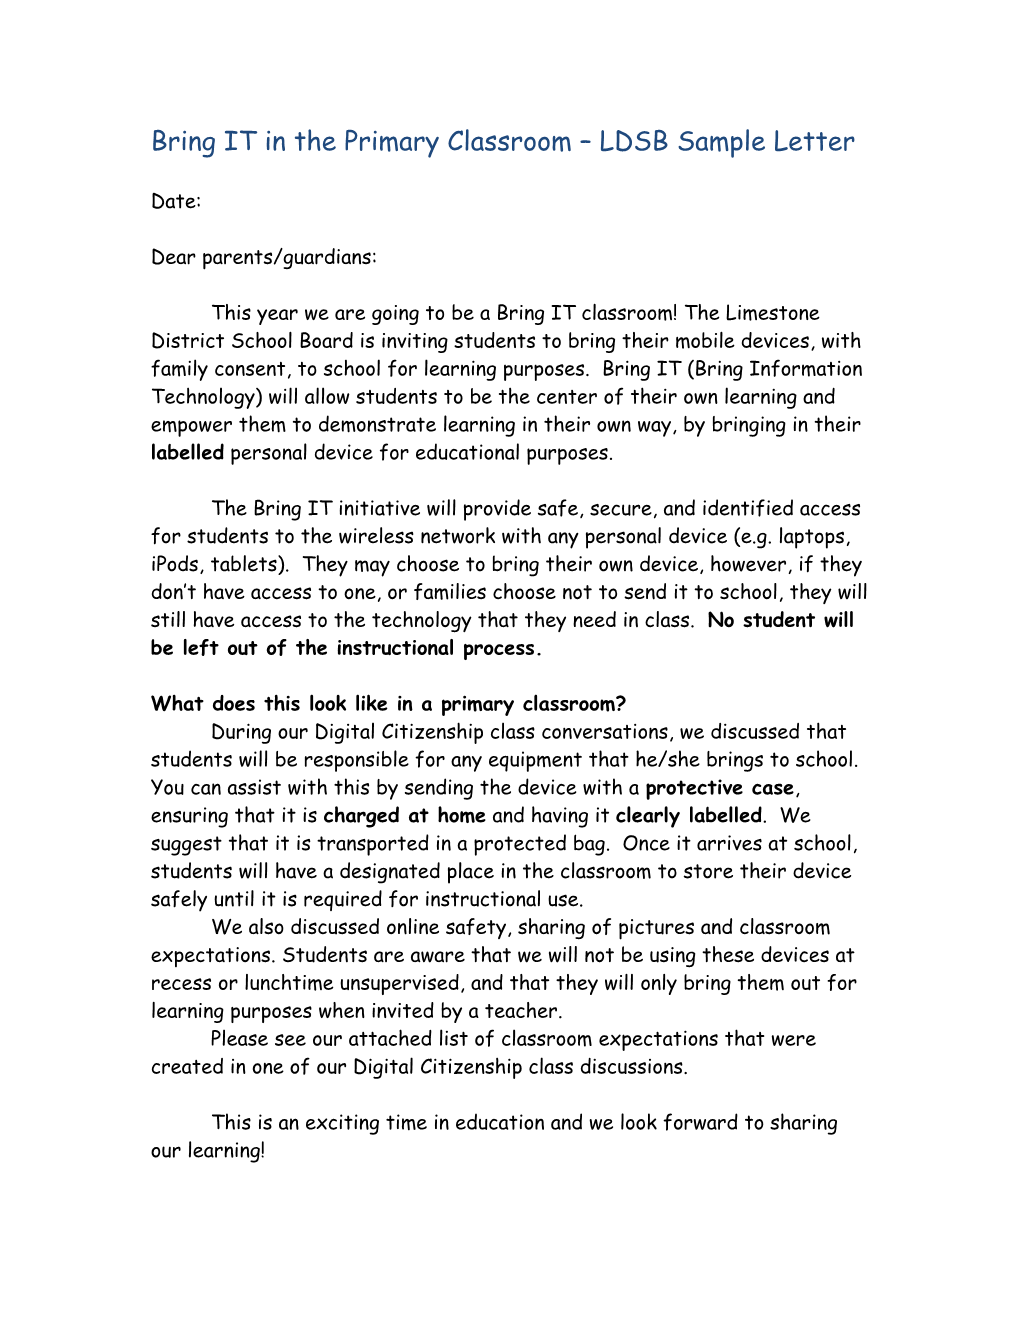 Bring IT in the Primary Classroom LDSB Sample Letter